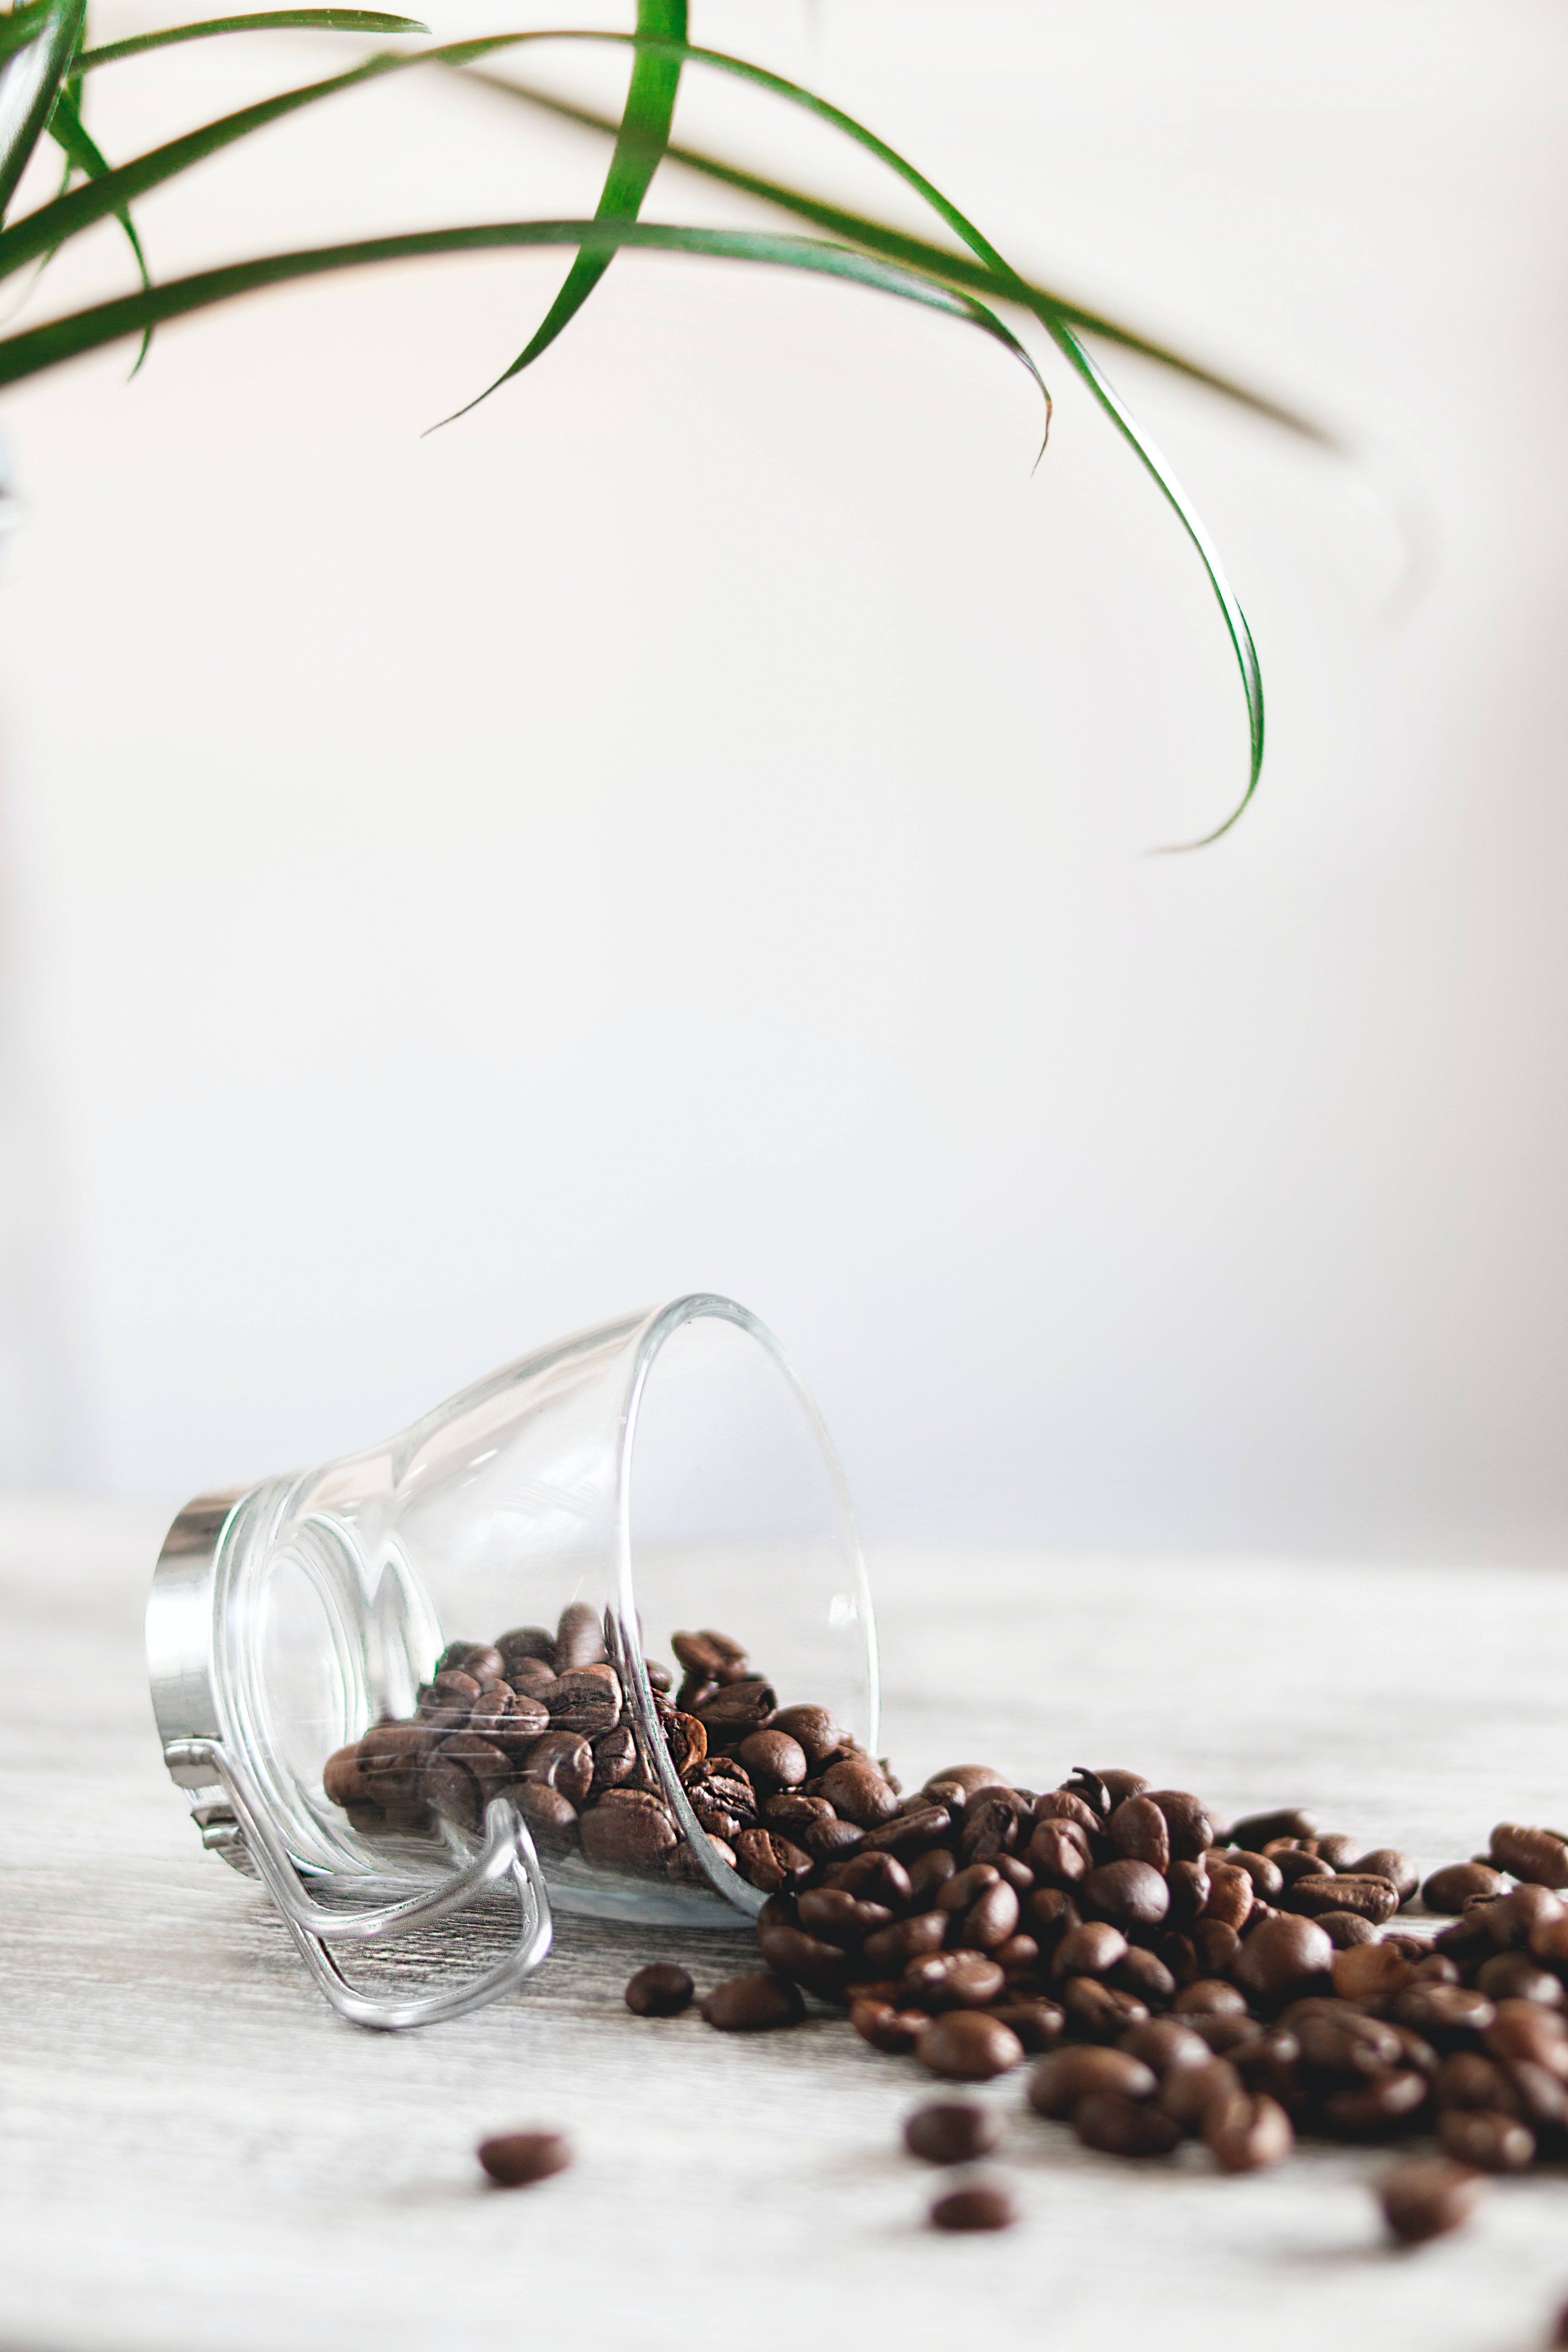 Coffee beans flowing from a glass on a table